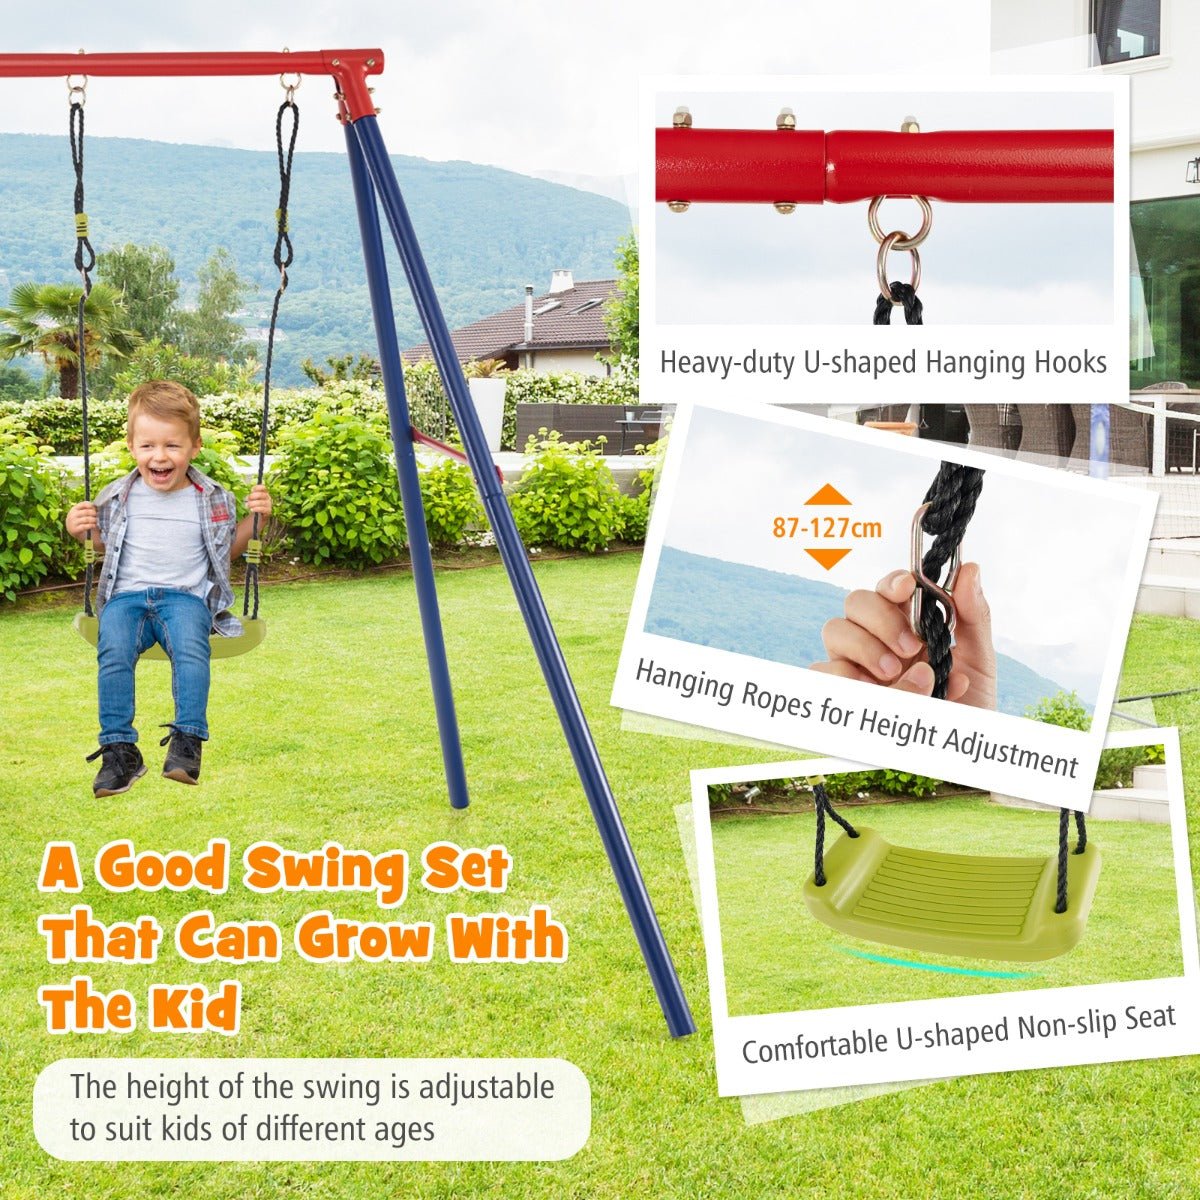 Adjustable Height 2-in-1 Swing Set: Exciting Playtime for Children